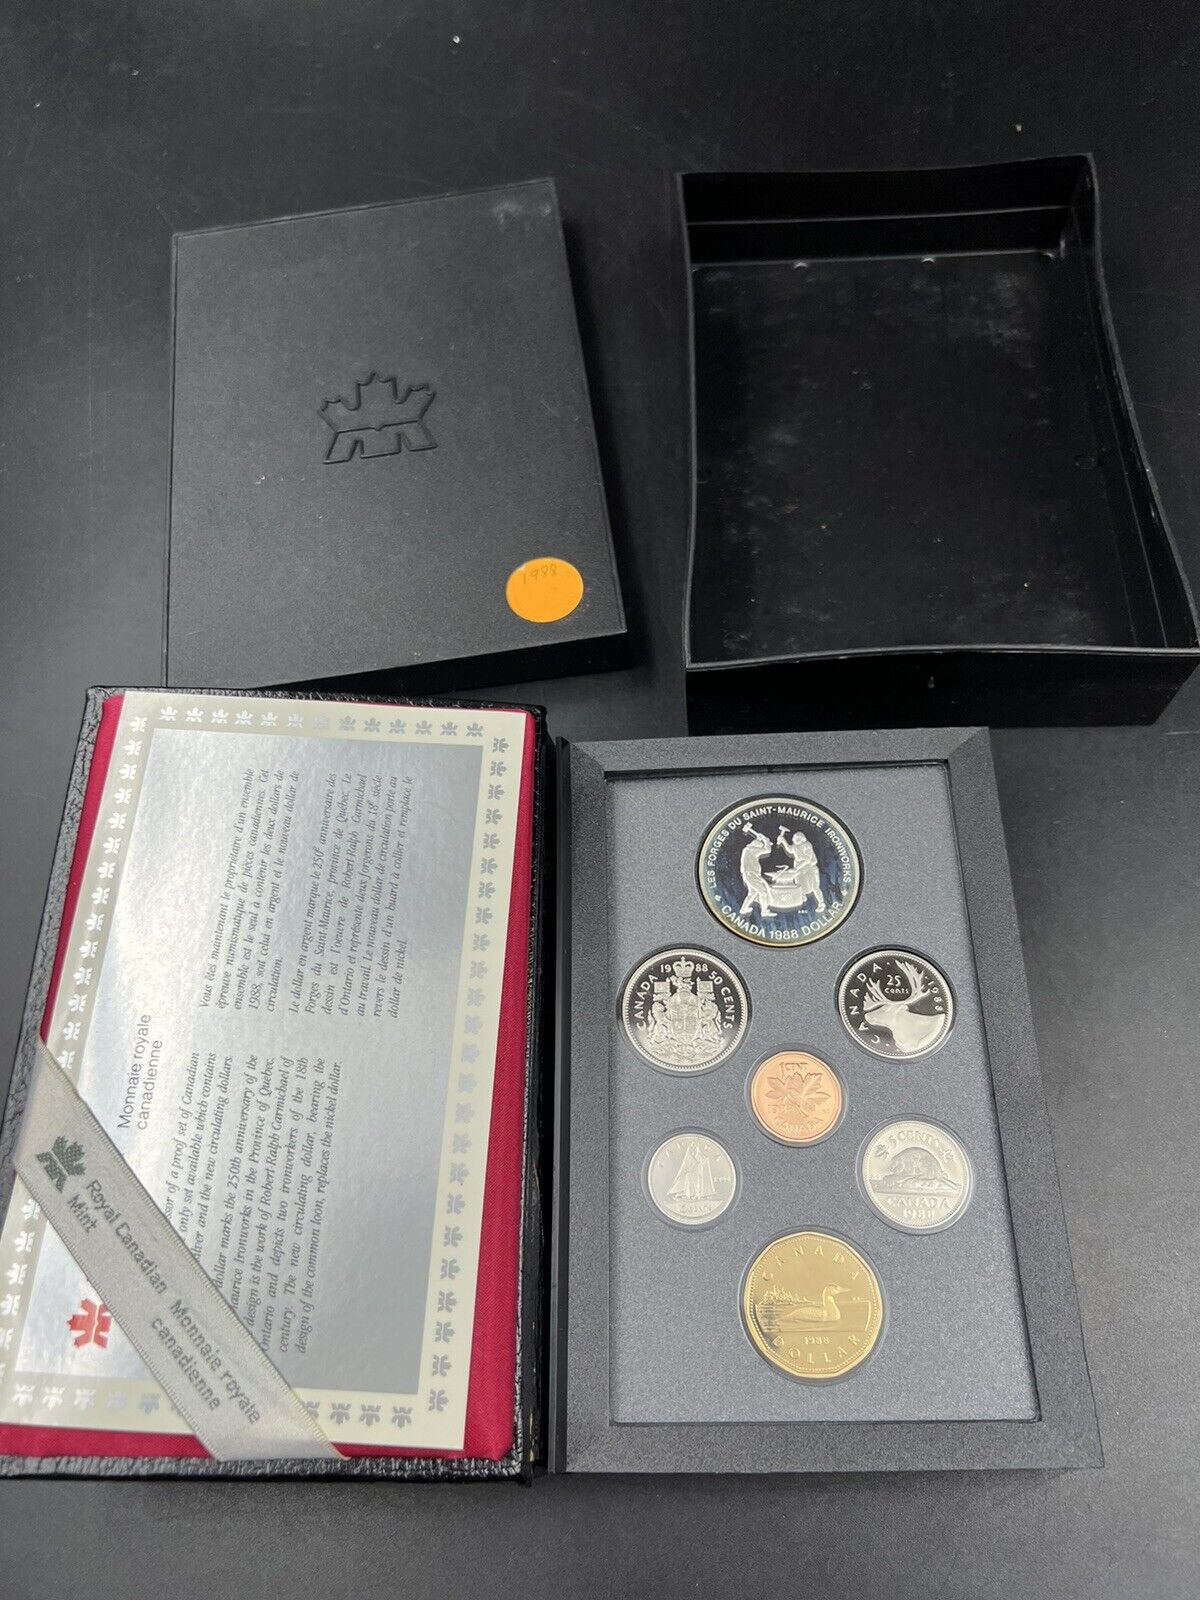 1988 Canada Double Dollar Proof Set Royal Canadian Mint RCM OGP In Plastic Case